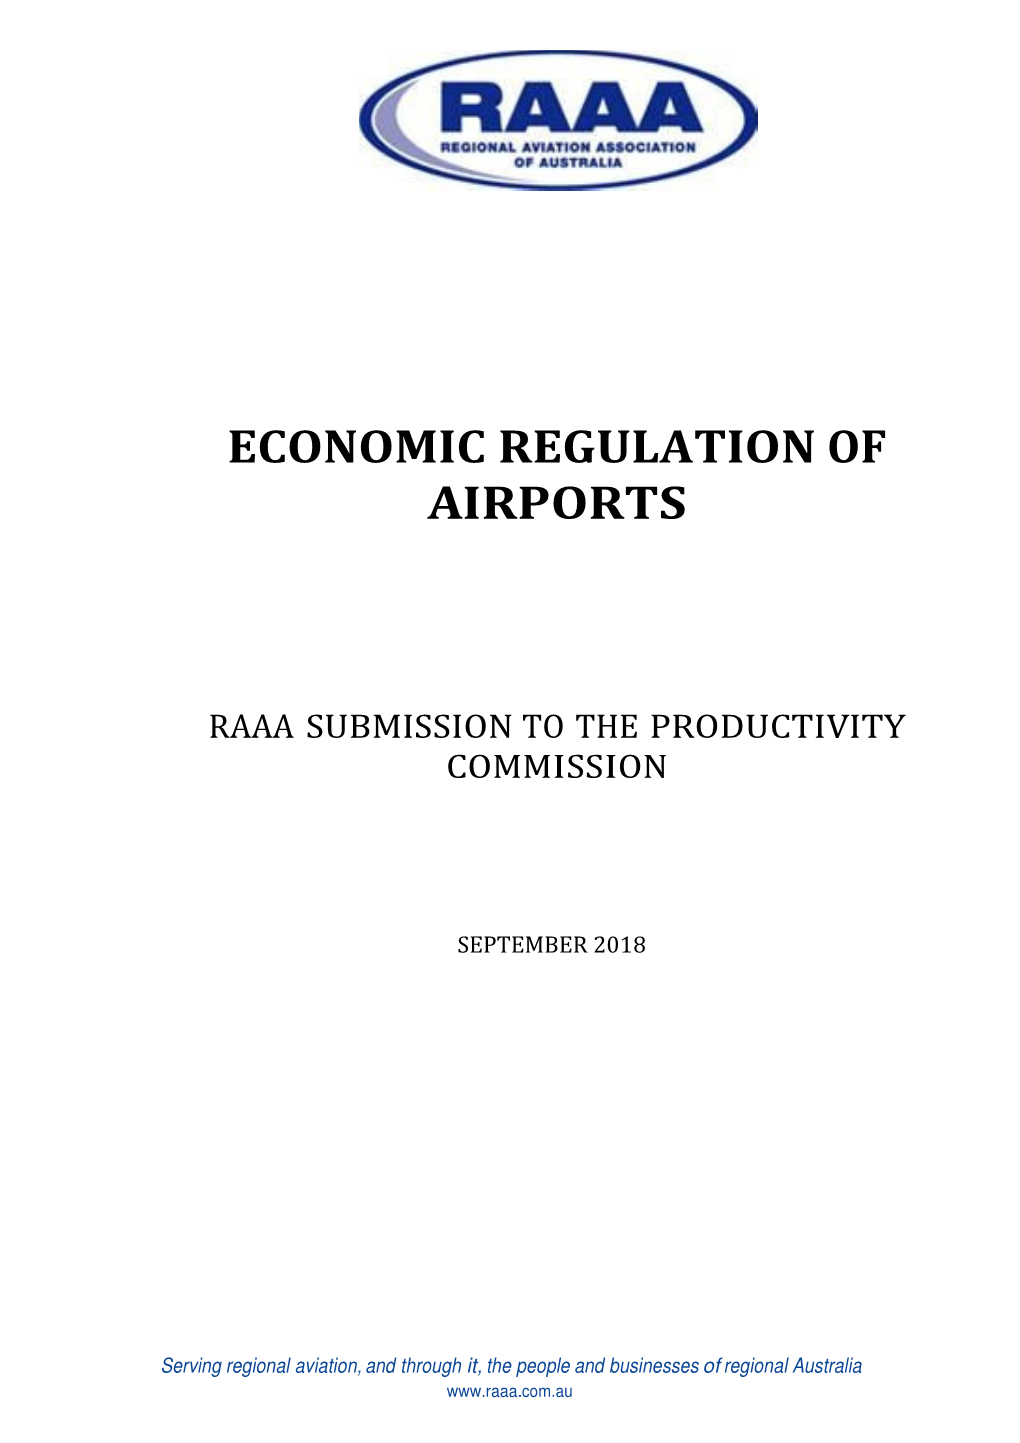 Regional Aviation Association of Australia (RAAA) and Widened Its Charter to Broaden the Membership Which Now Includes the Businesses That Support Regional Aviation